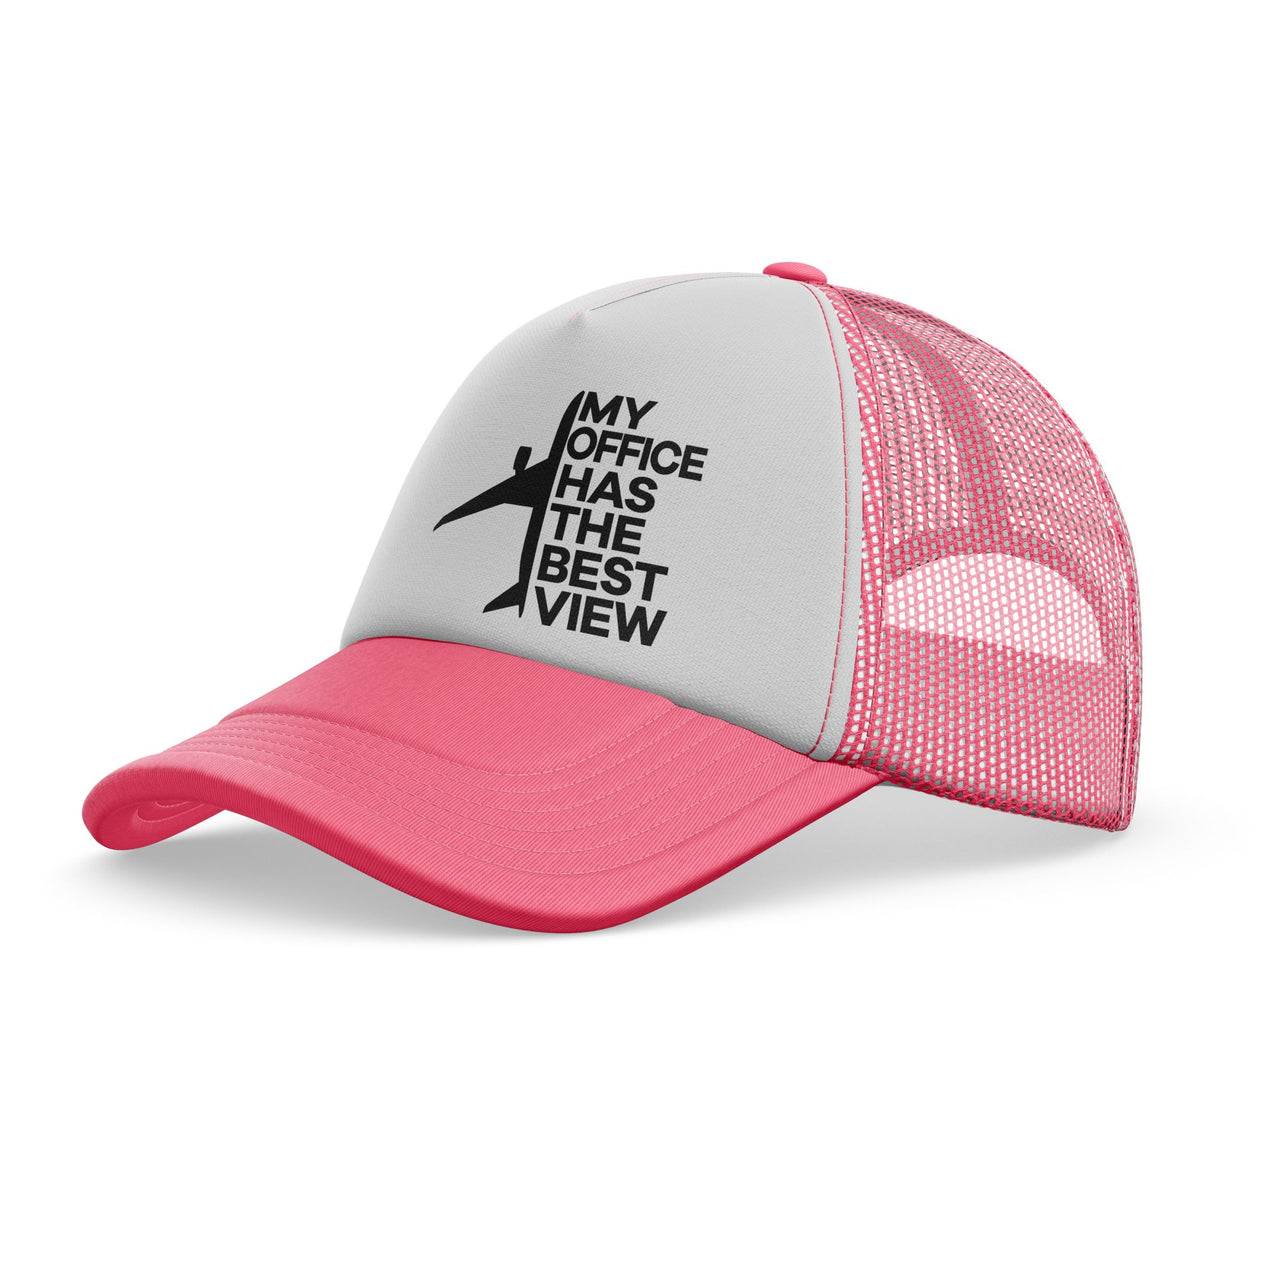 My Office Has The Best View Designed Trucker Caps & Hats